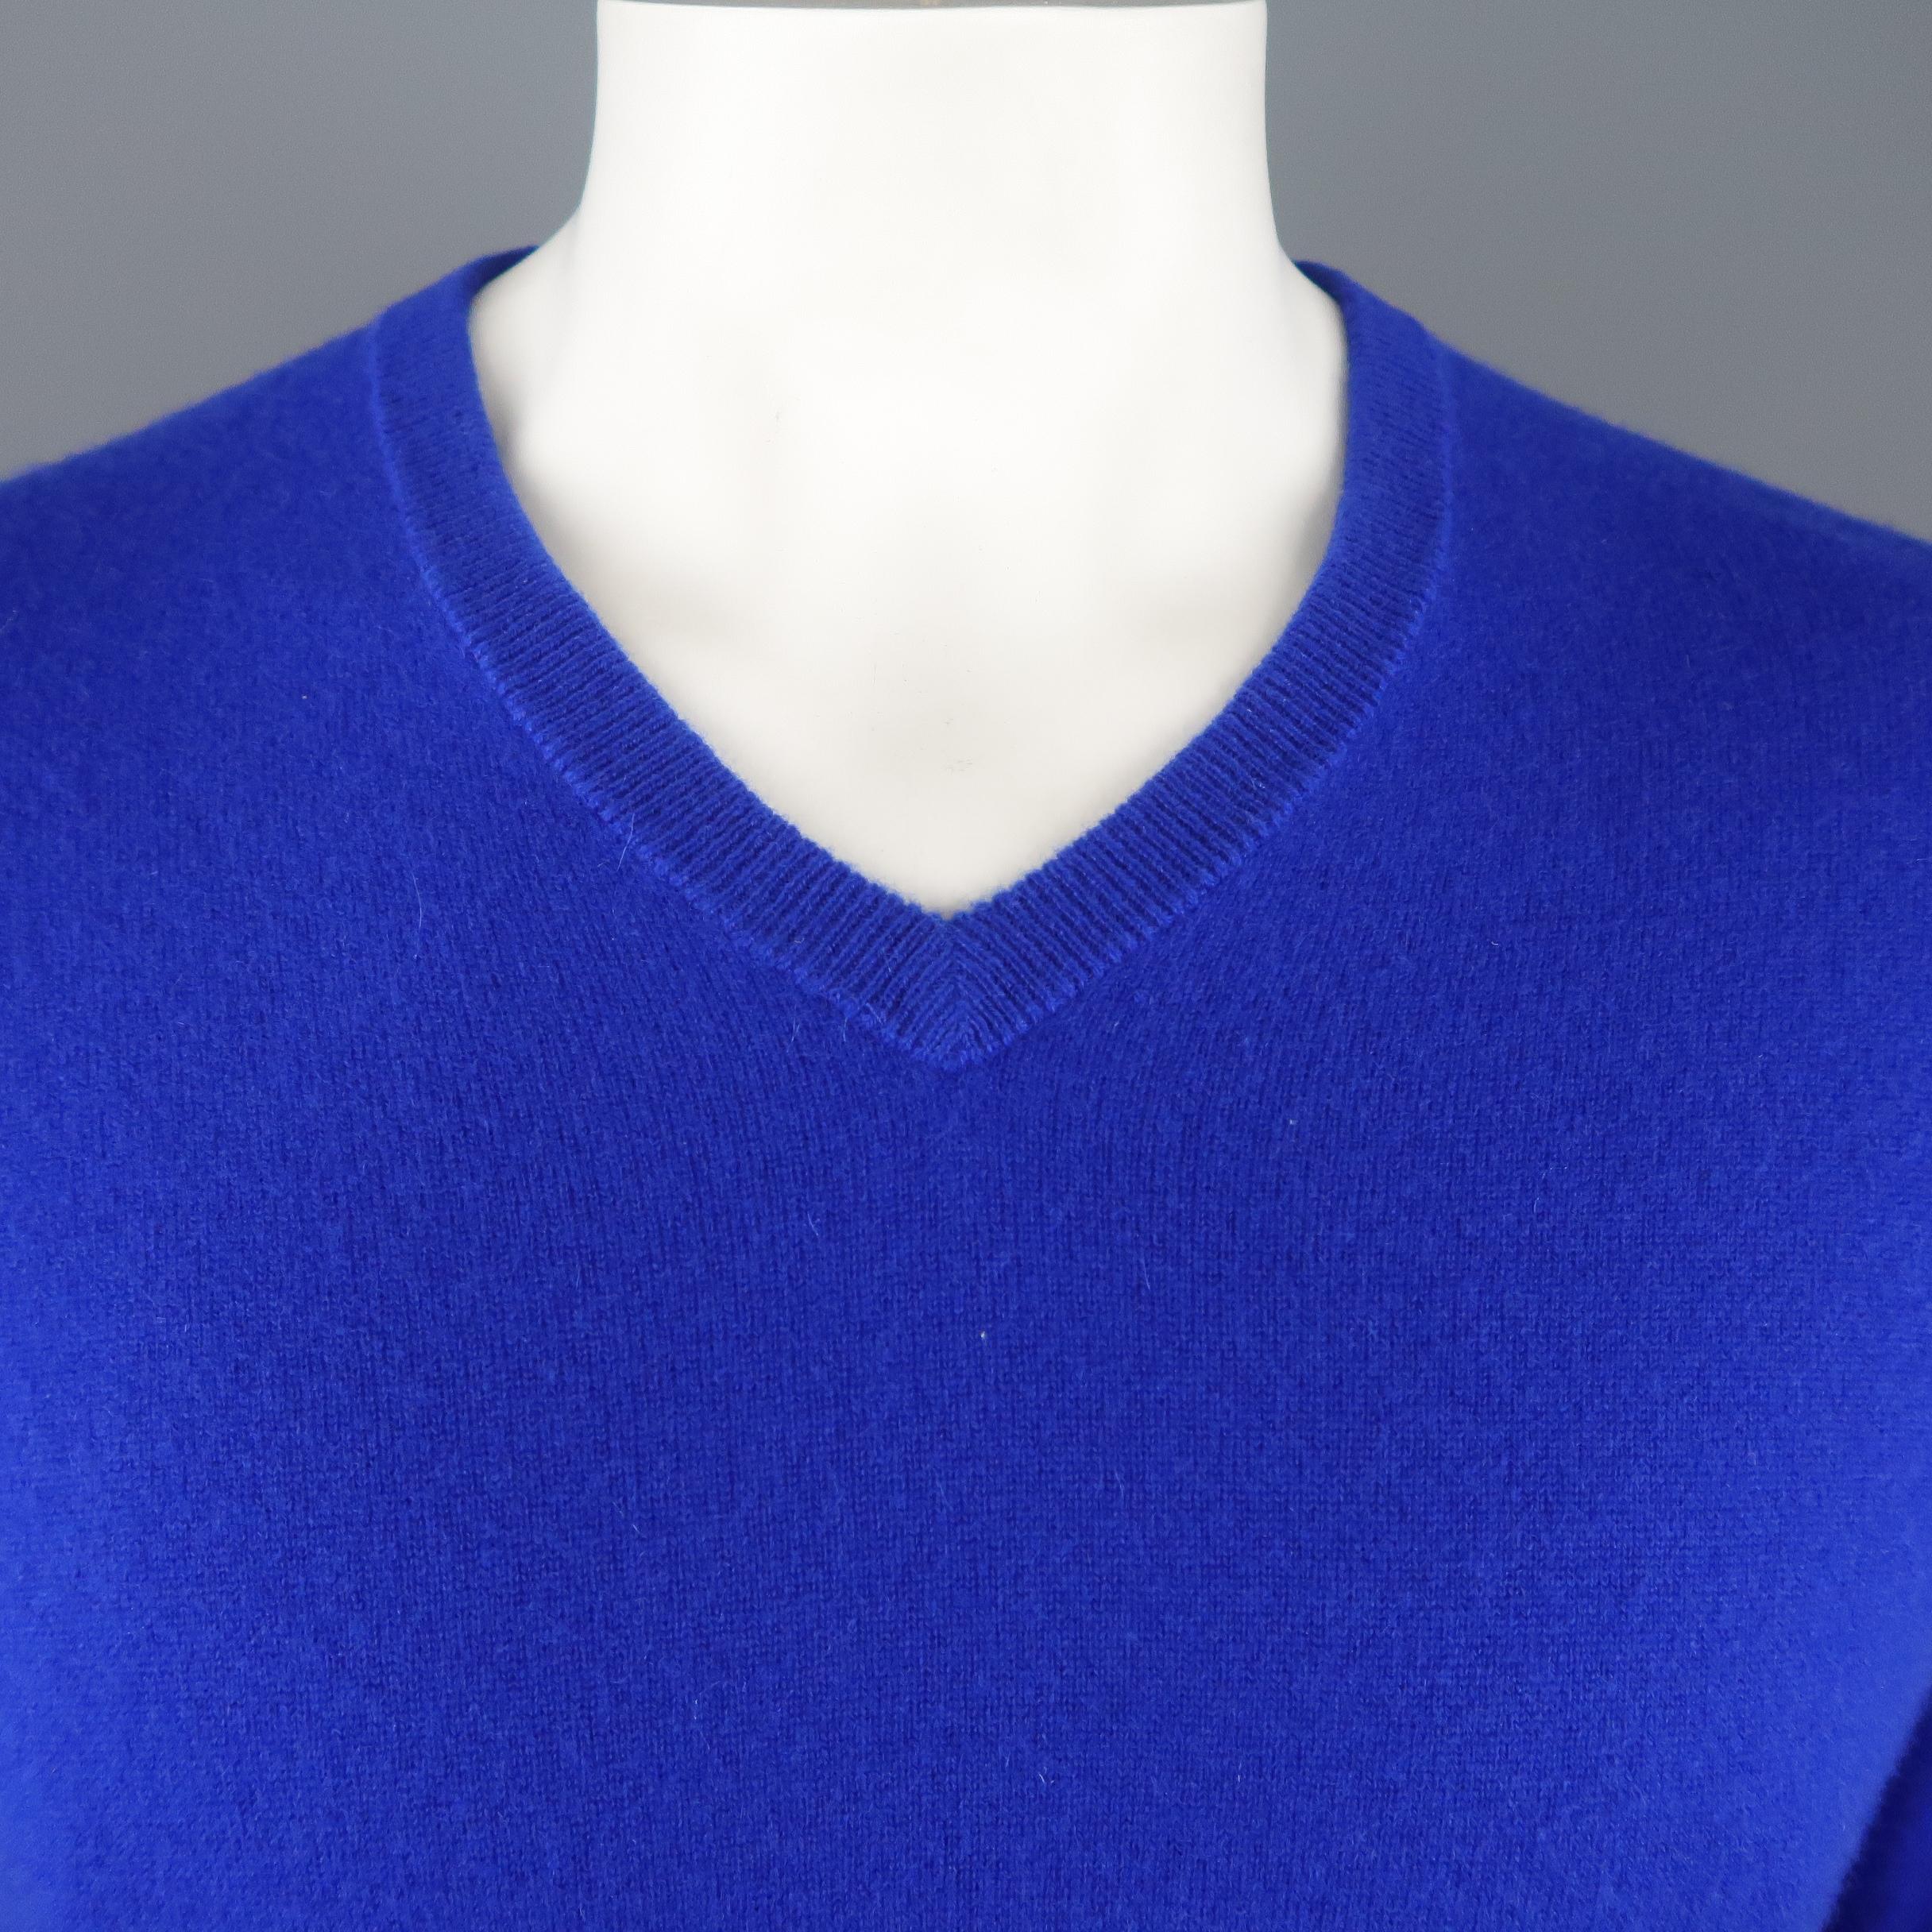 RALPH LAUREN POLO LABEL pullover sweater comes in royal blue cashmere knit with a ribbed V neck and cuffs.
 
Excellent Pre-Owned Condition.
Marked: L
 
Measurements:
 
Shoulder: 19 in.
Chest: 44 in.
Sleeve: 29 in.
Length: 27 in.